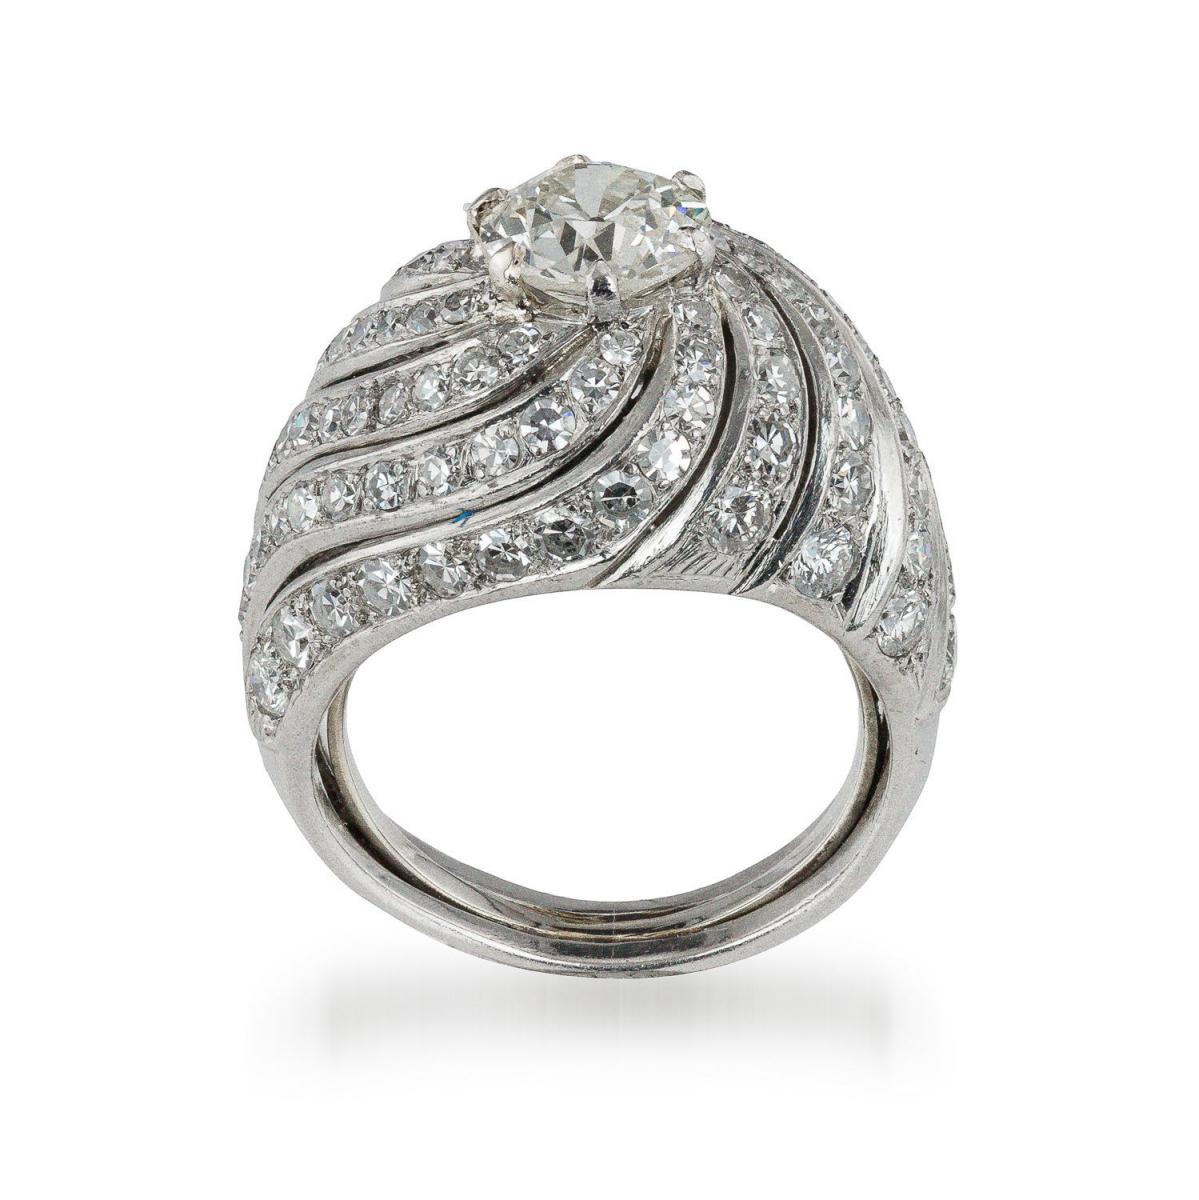 A French platinum set bombe style ring with a central diamond of 1.50 carat